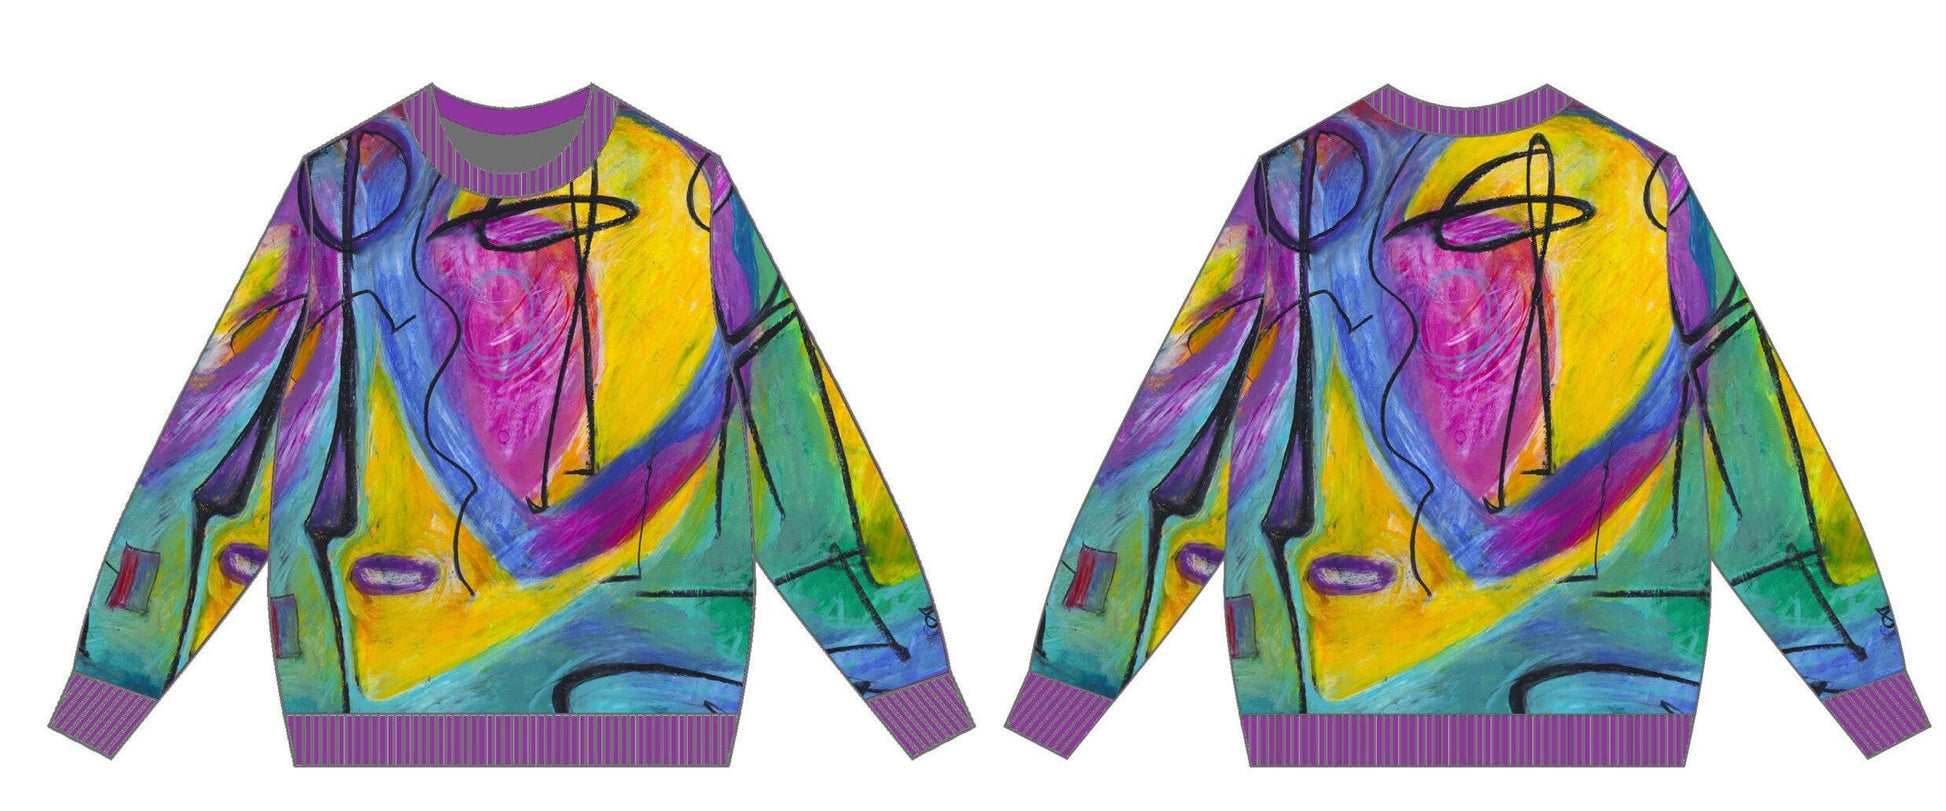 Bruce Mishell Sweater 100% cotton with “MYRA” Art print Available M, L, XL